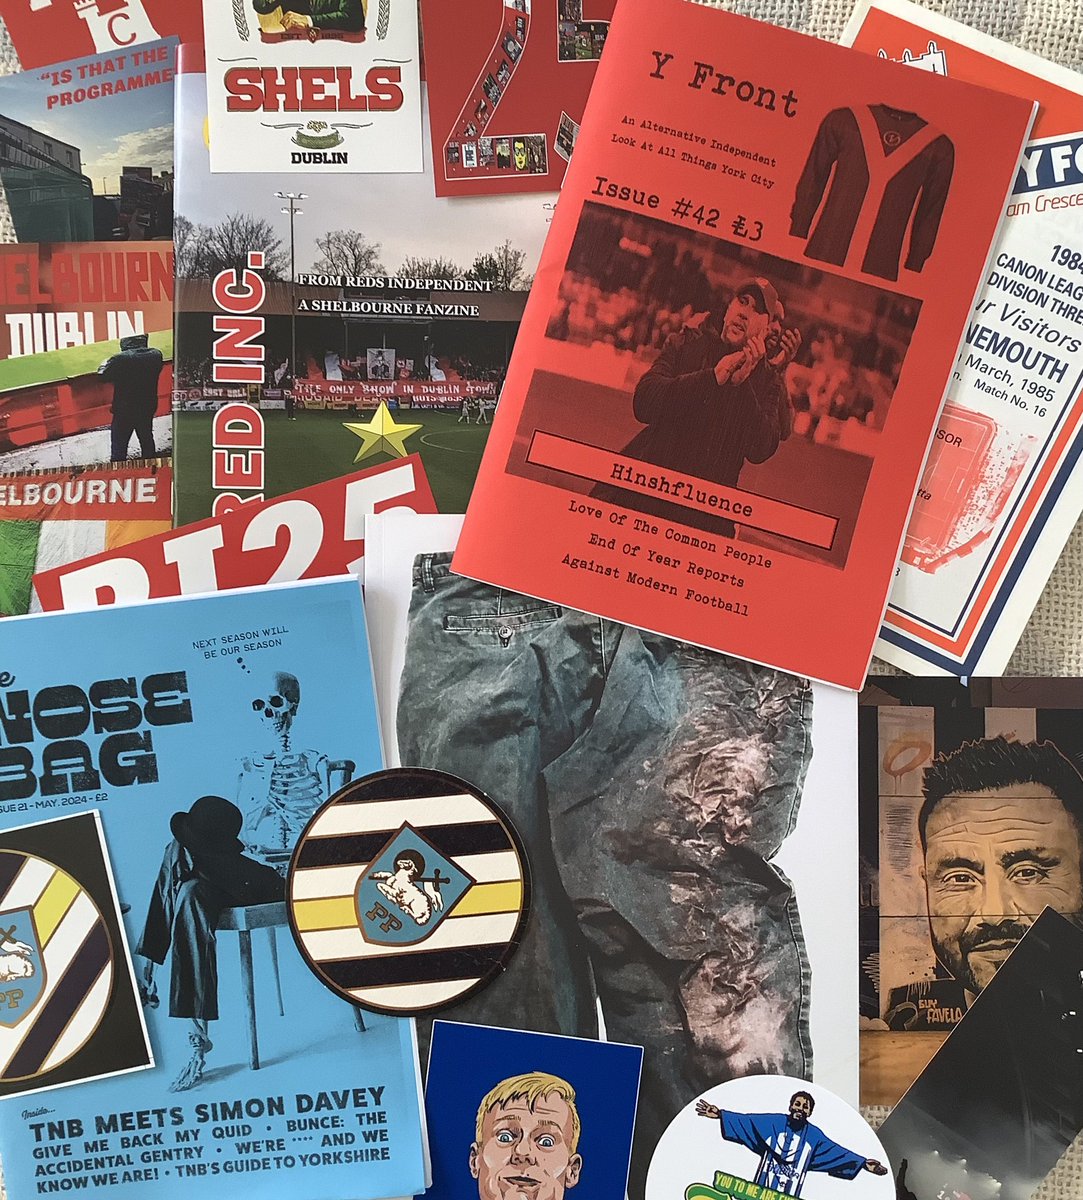 A great week for fanzines - I’m always amazed at the time and effort put in by those who put these together. Not just the zines themselves, just look at the extras here. Outstanding stuff from @tnbfanzine @DogmaBrighton @RedsIndependent @YfrontFanzine